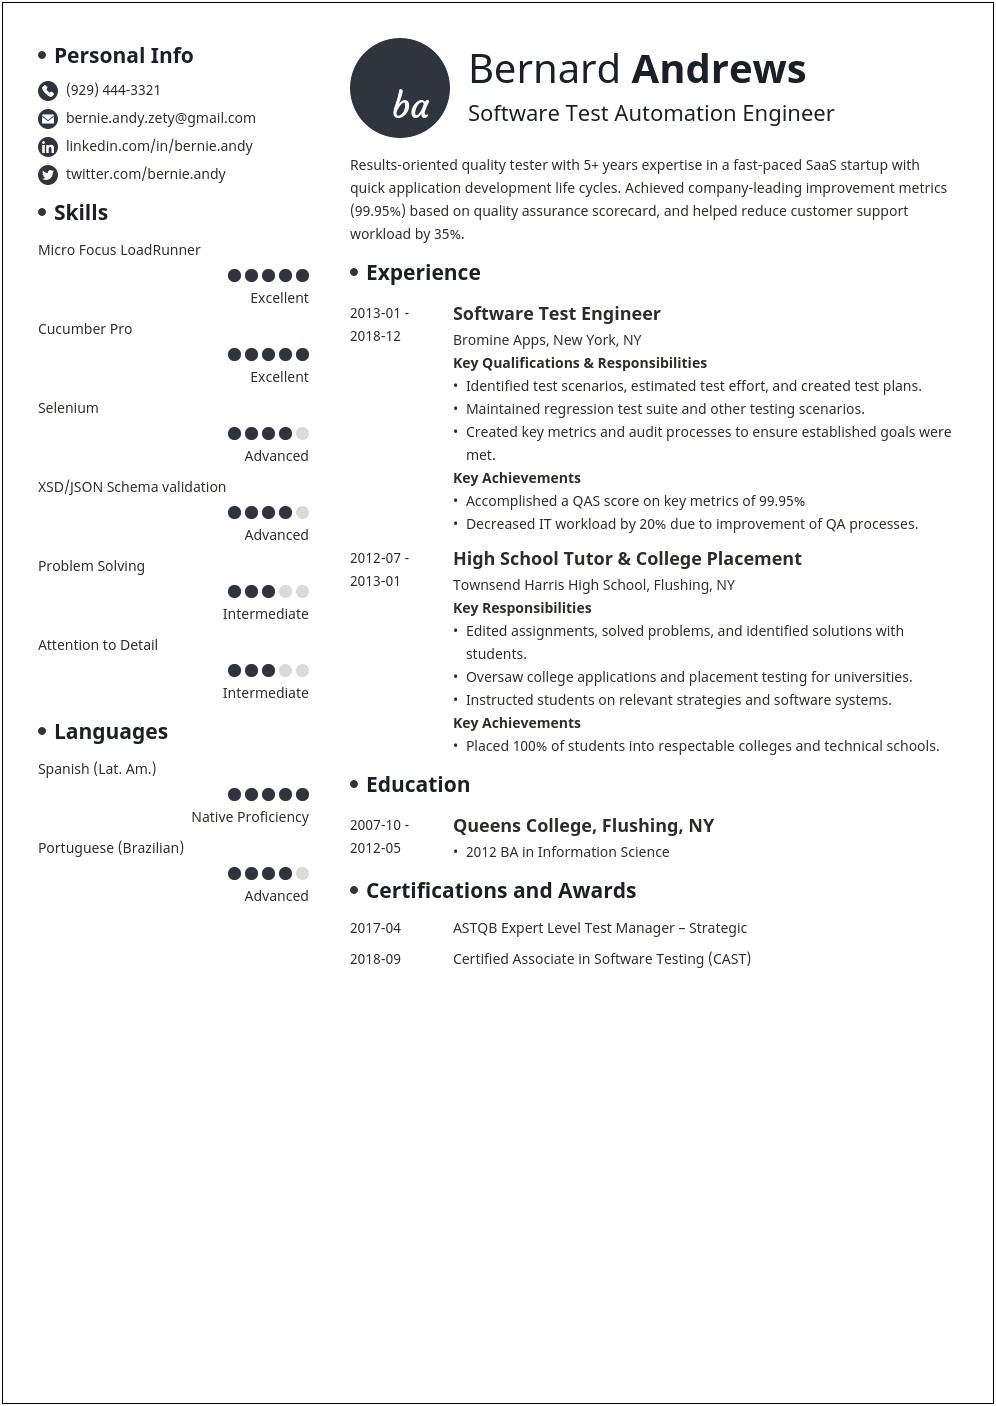 Resume Objective Statement For Quality Assurance